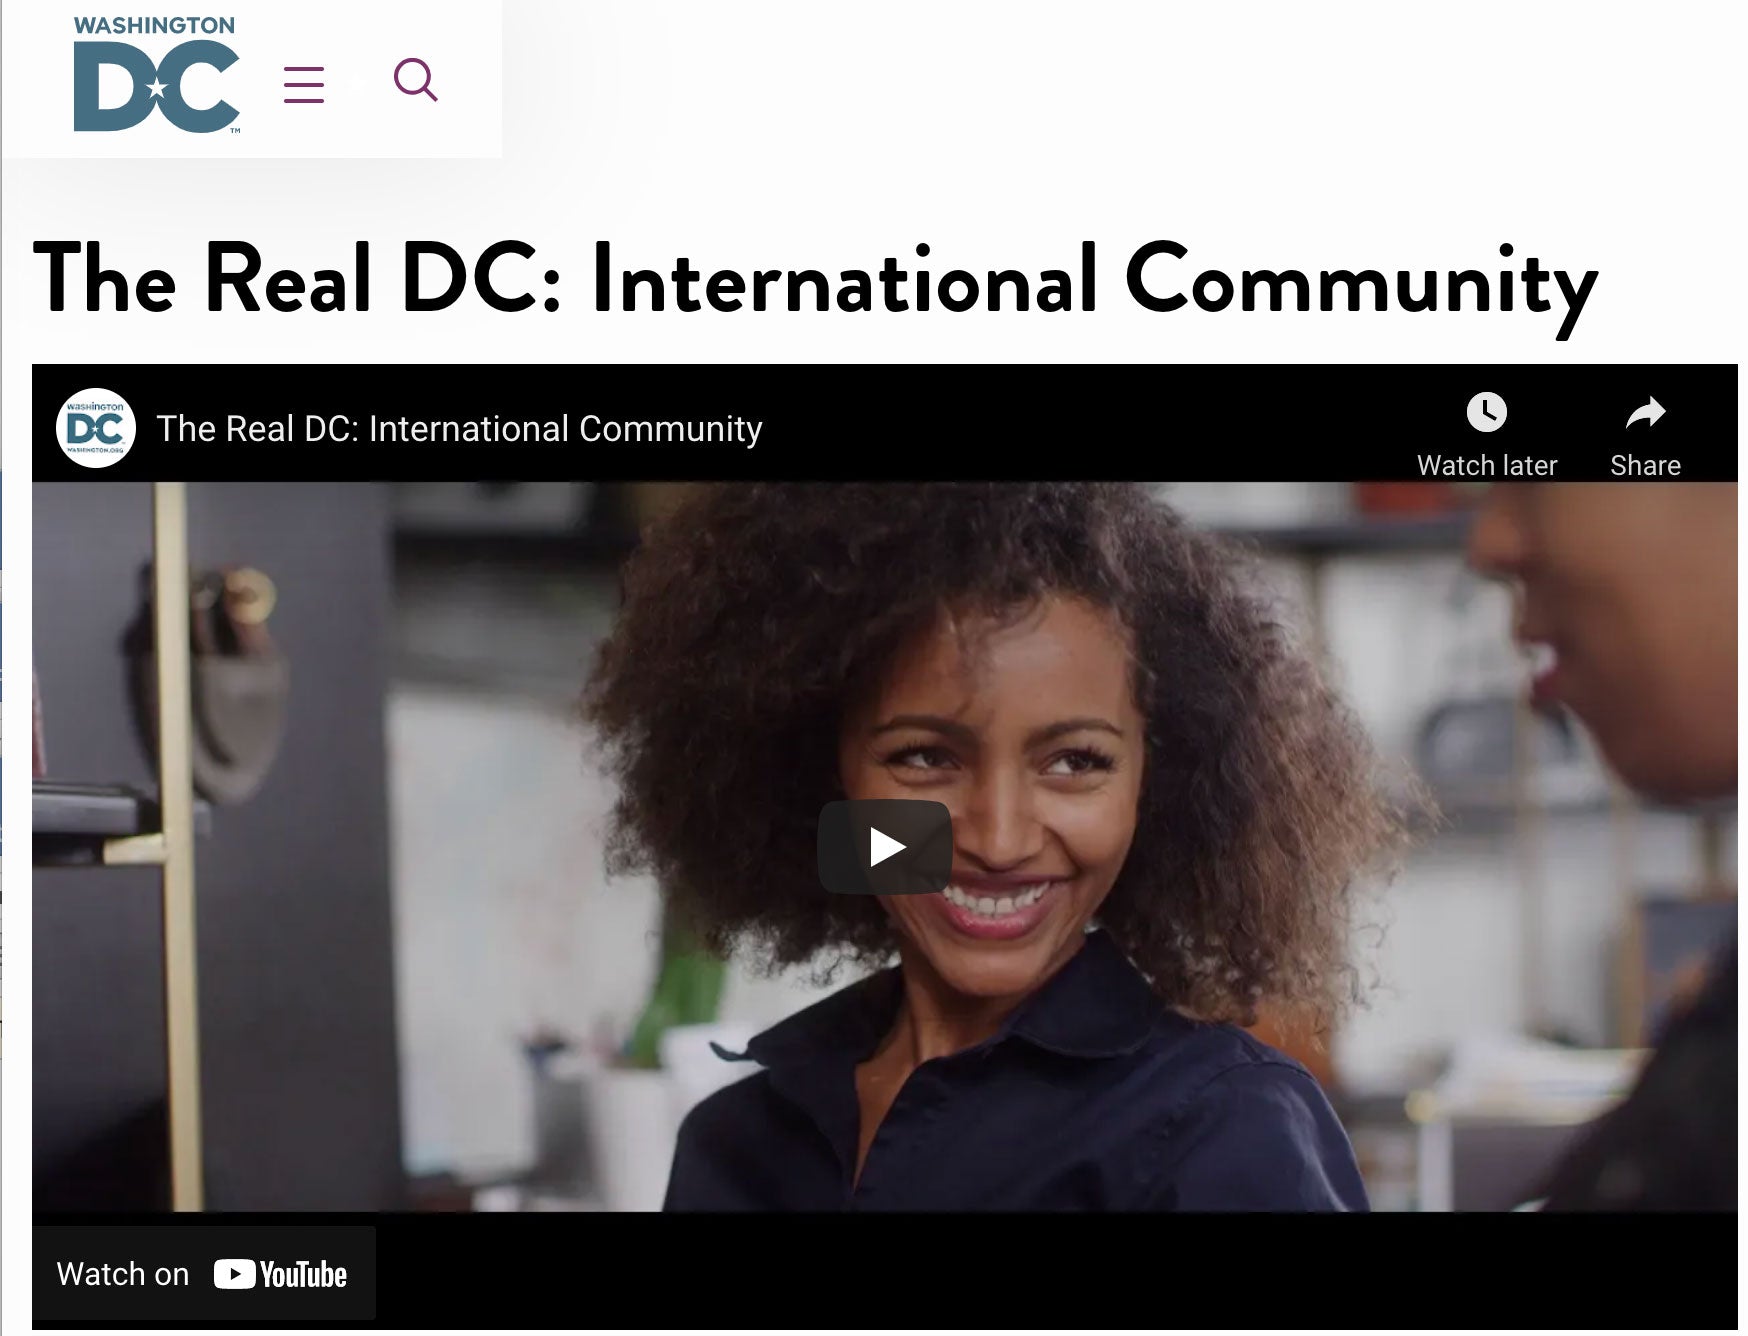 The Real DC: International Community with Abai Schulze